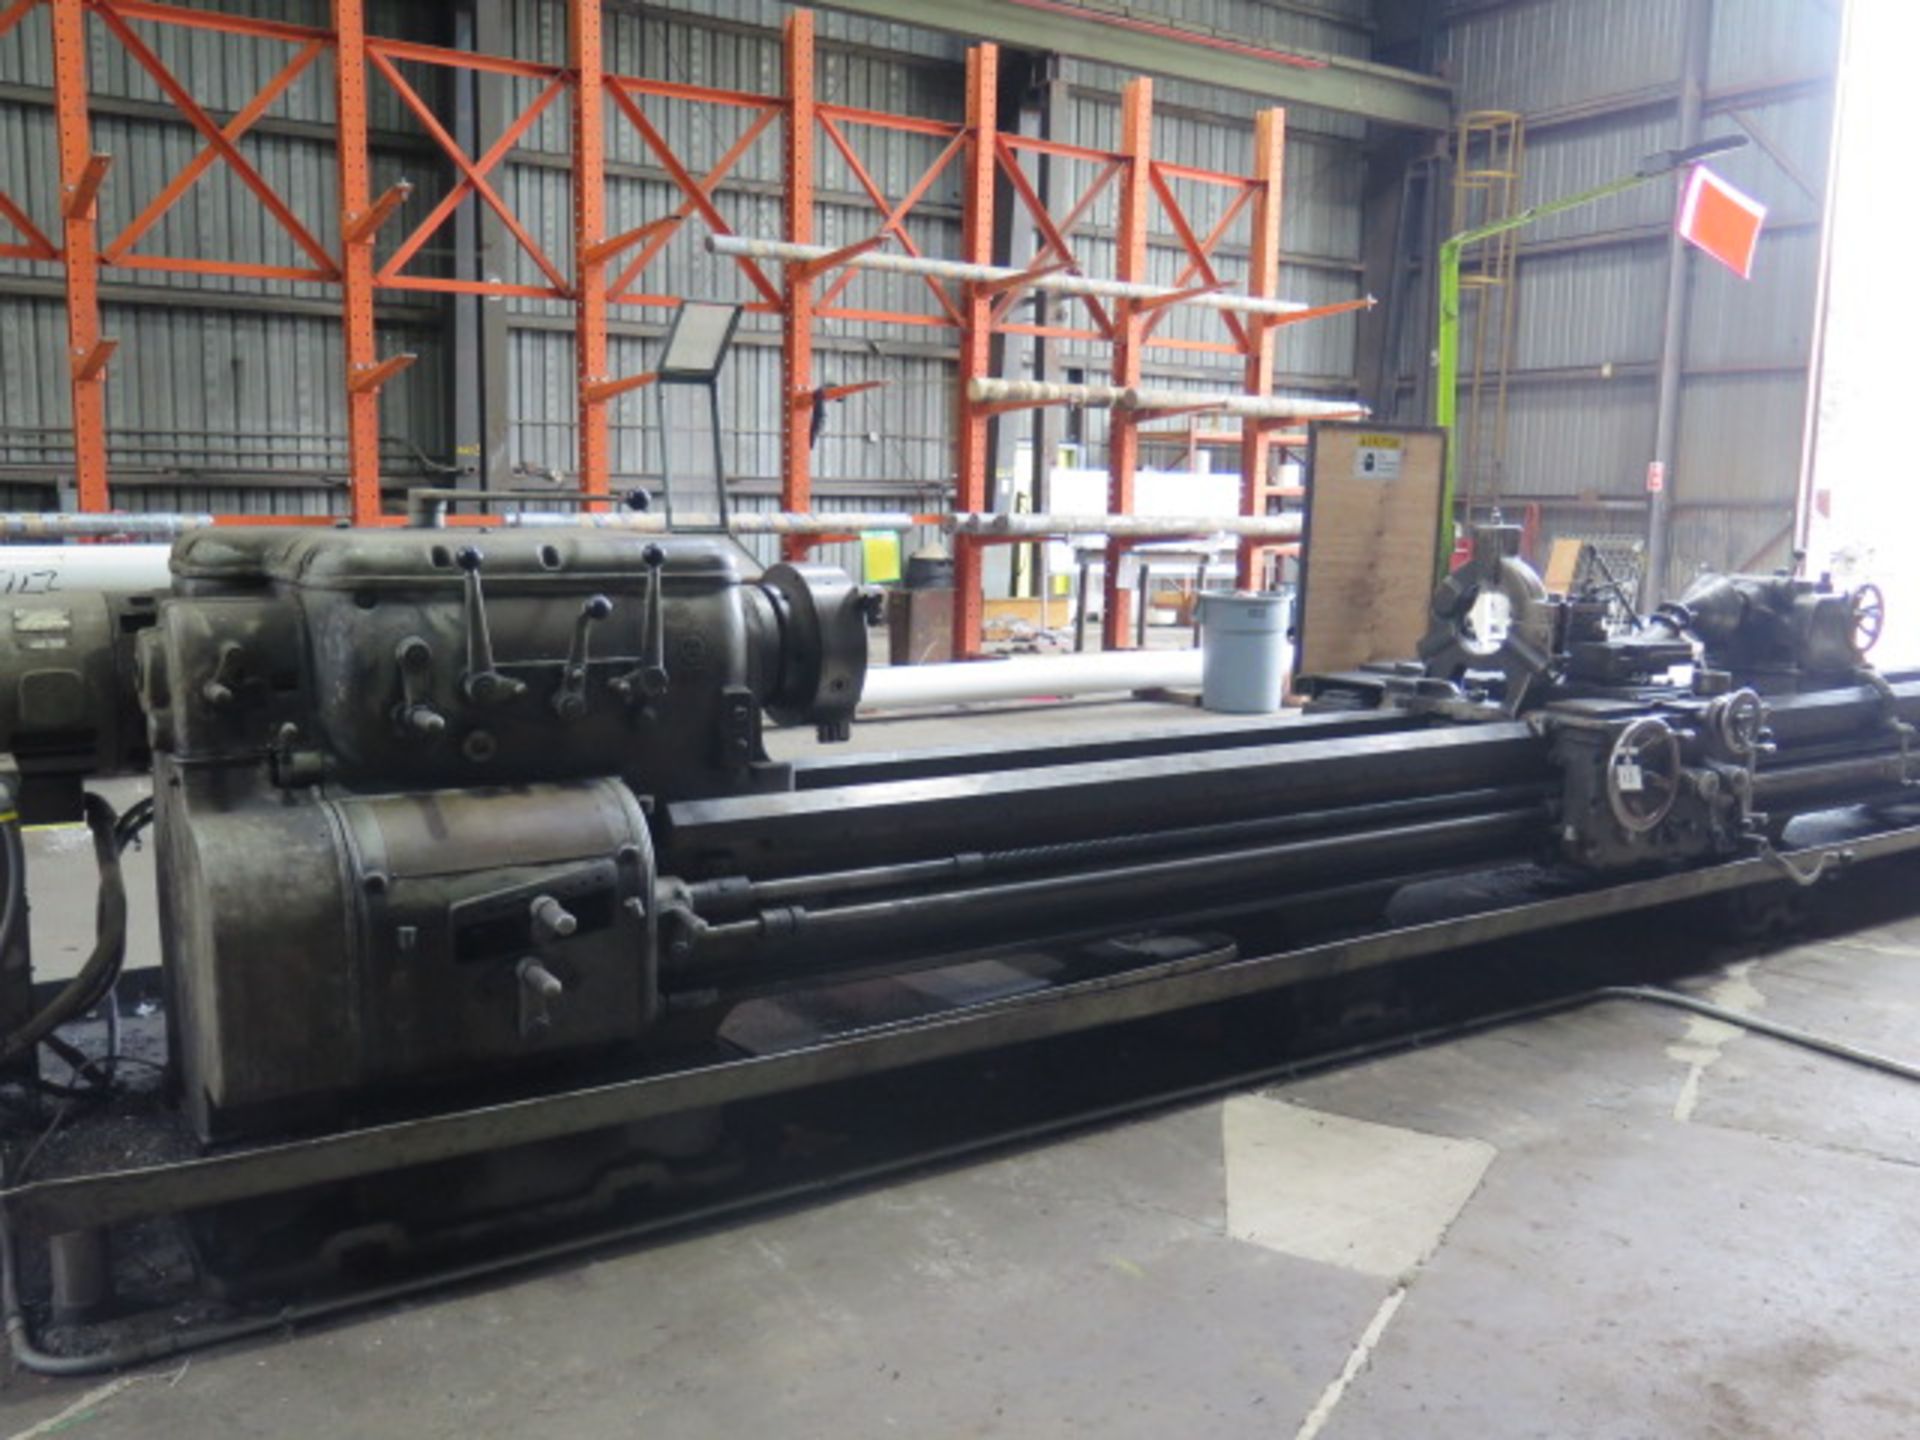 Axelson 25 28” x 216” Geared Head Lathe w/ 24’ Bed, 8-555 RPM,Taper Attachment, Tailstock,SOLD AS IS